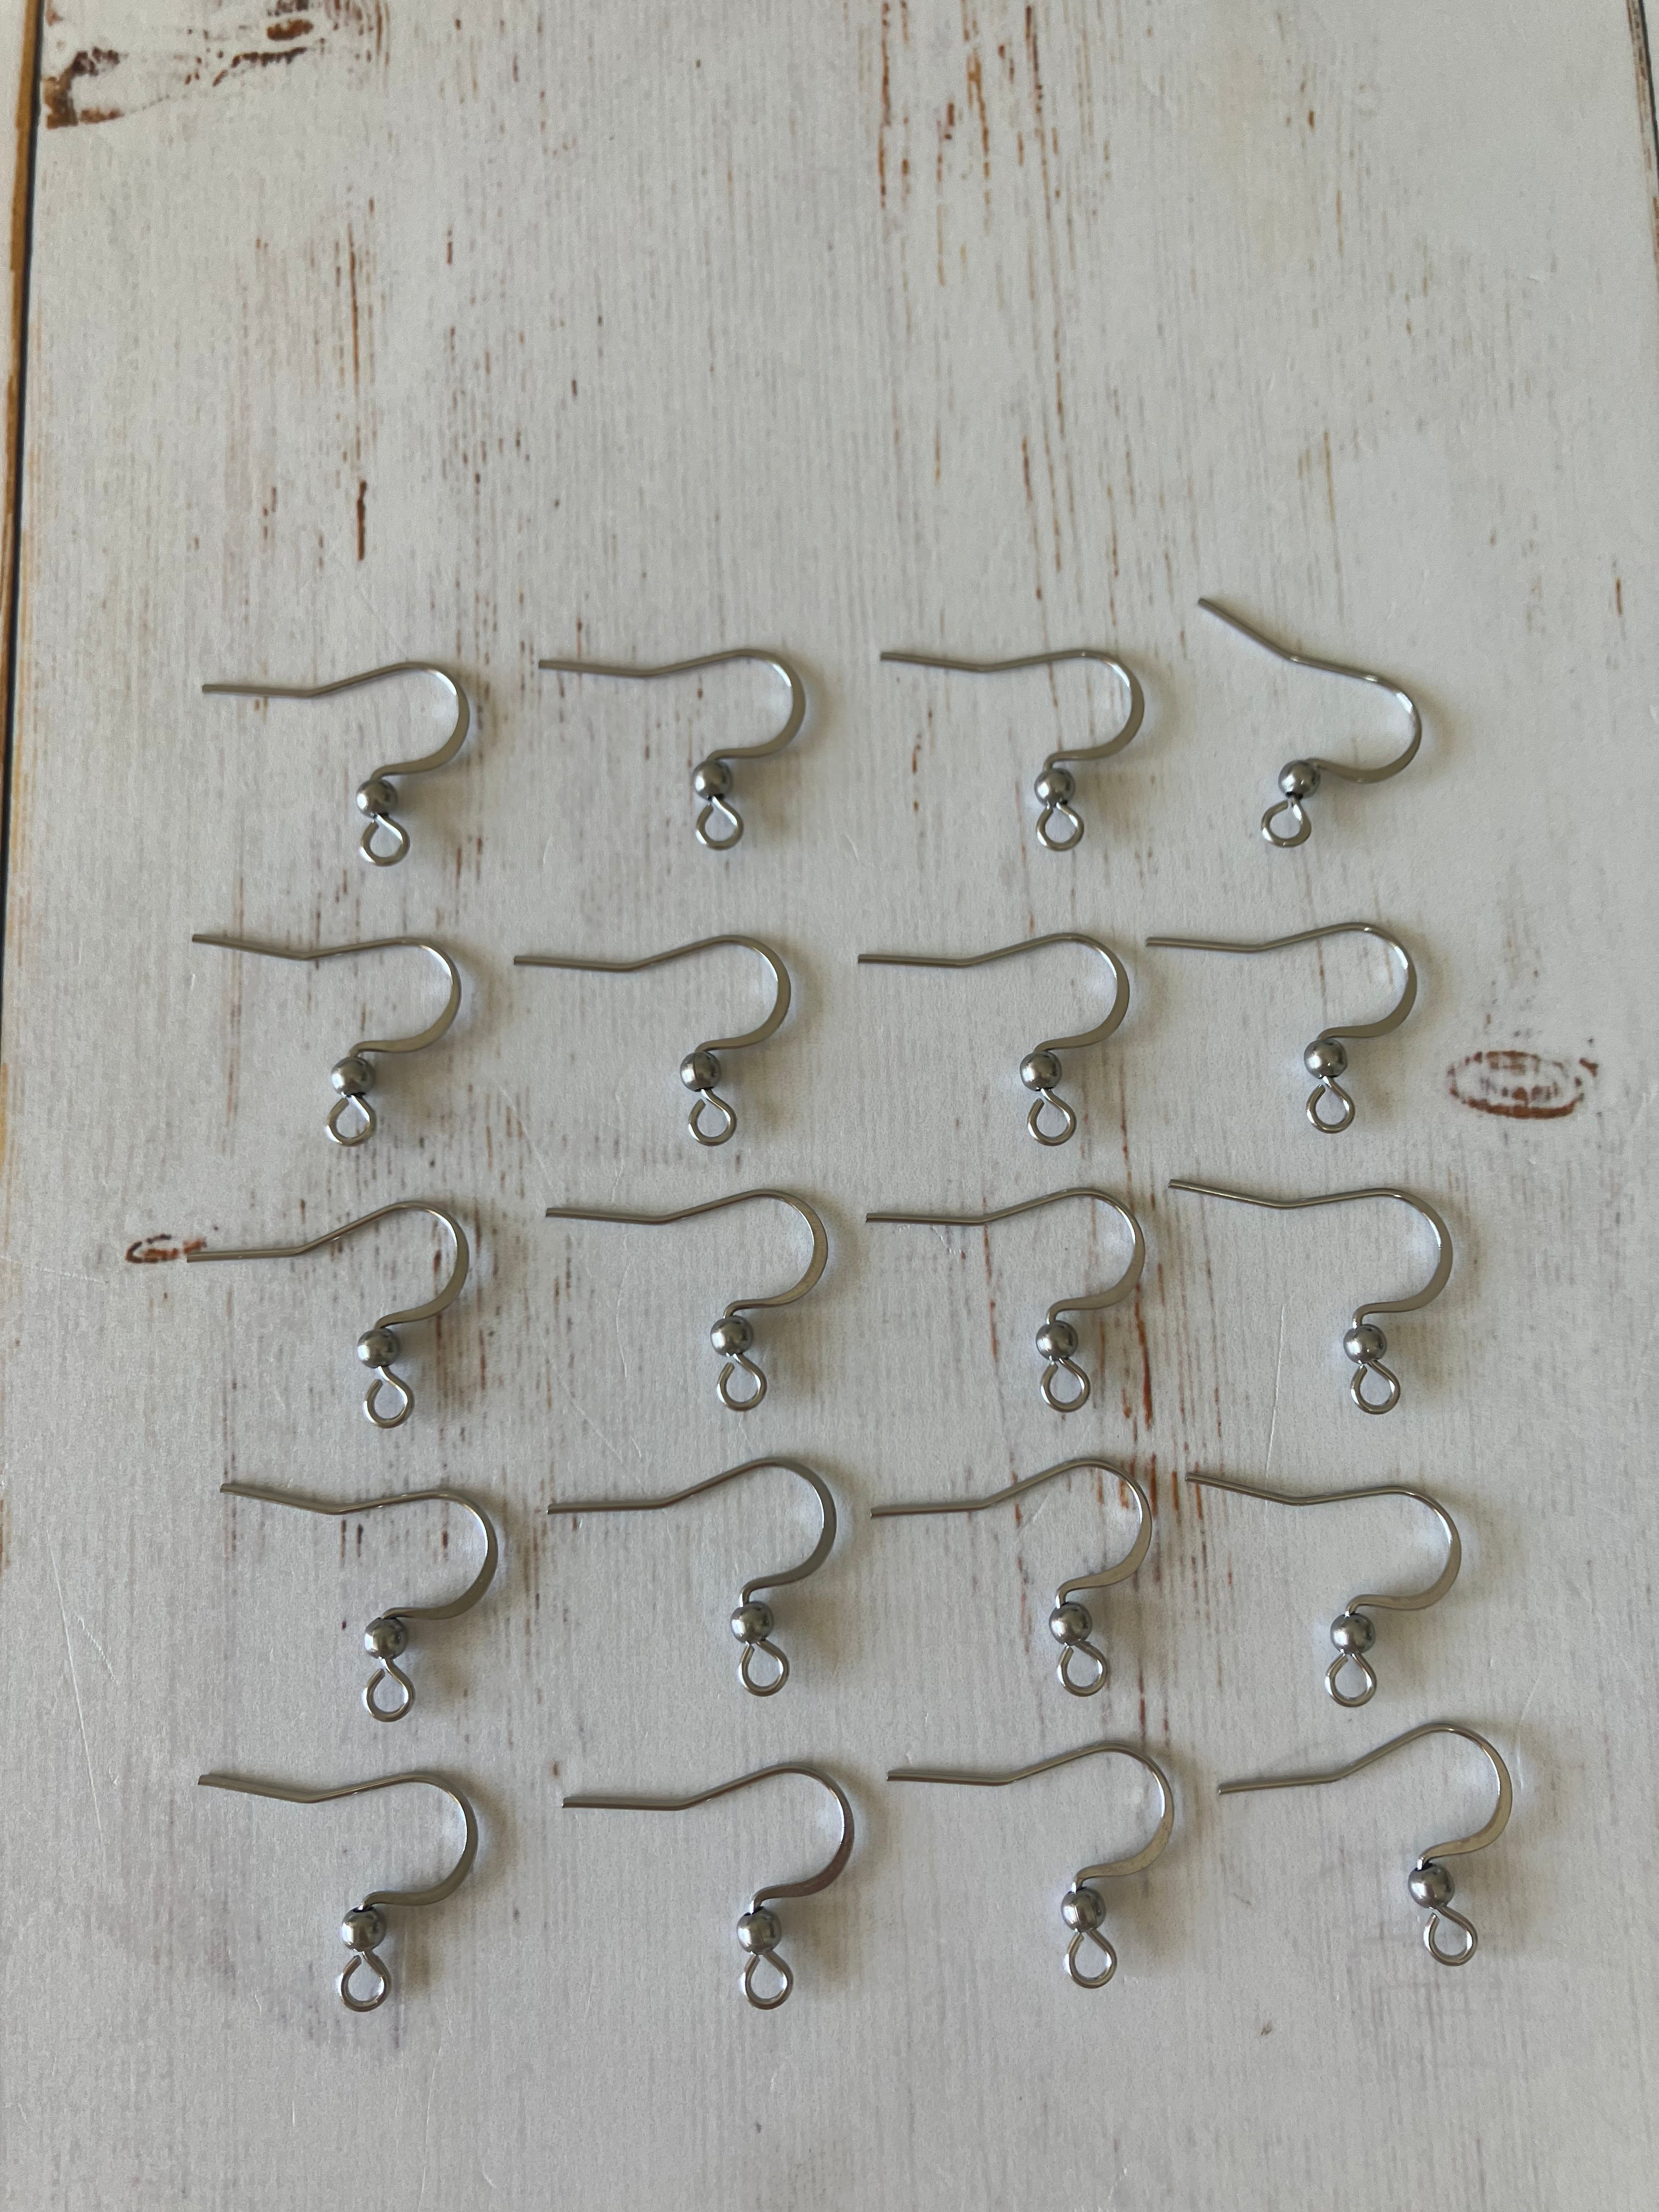 316 Surgical Stainless Steel French Earing Hooks  (10 Pairs)